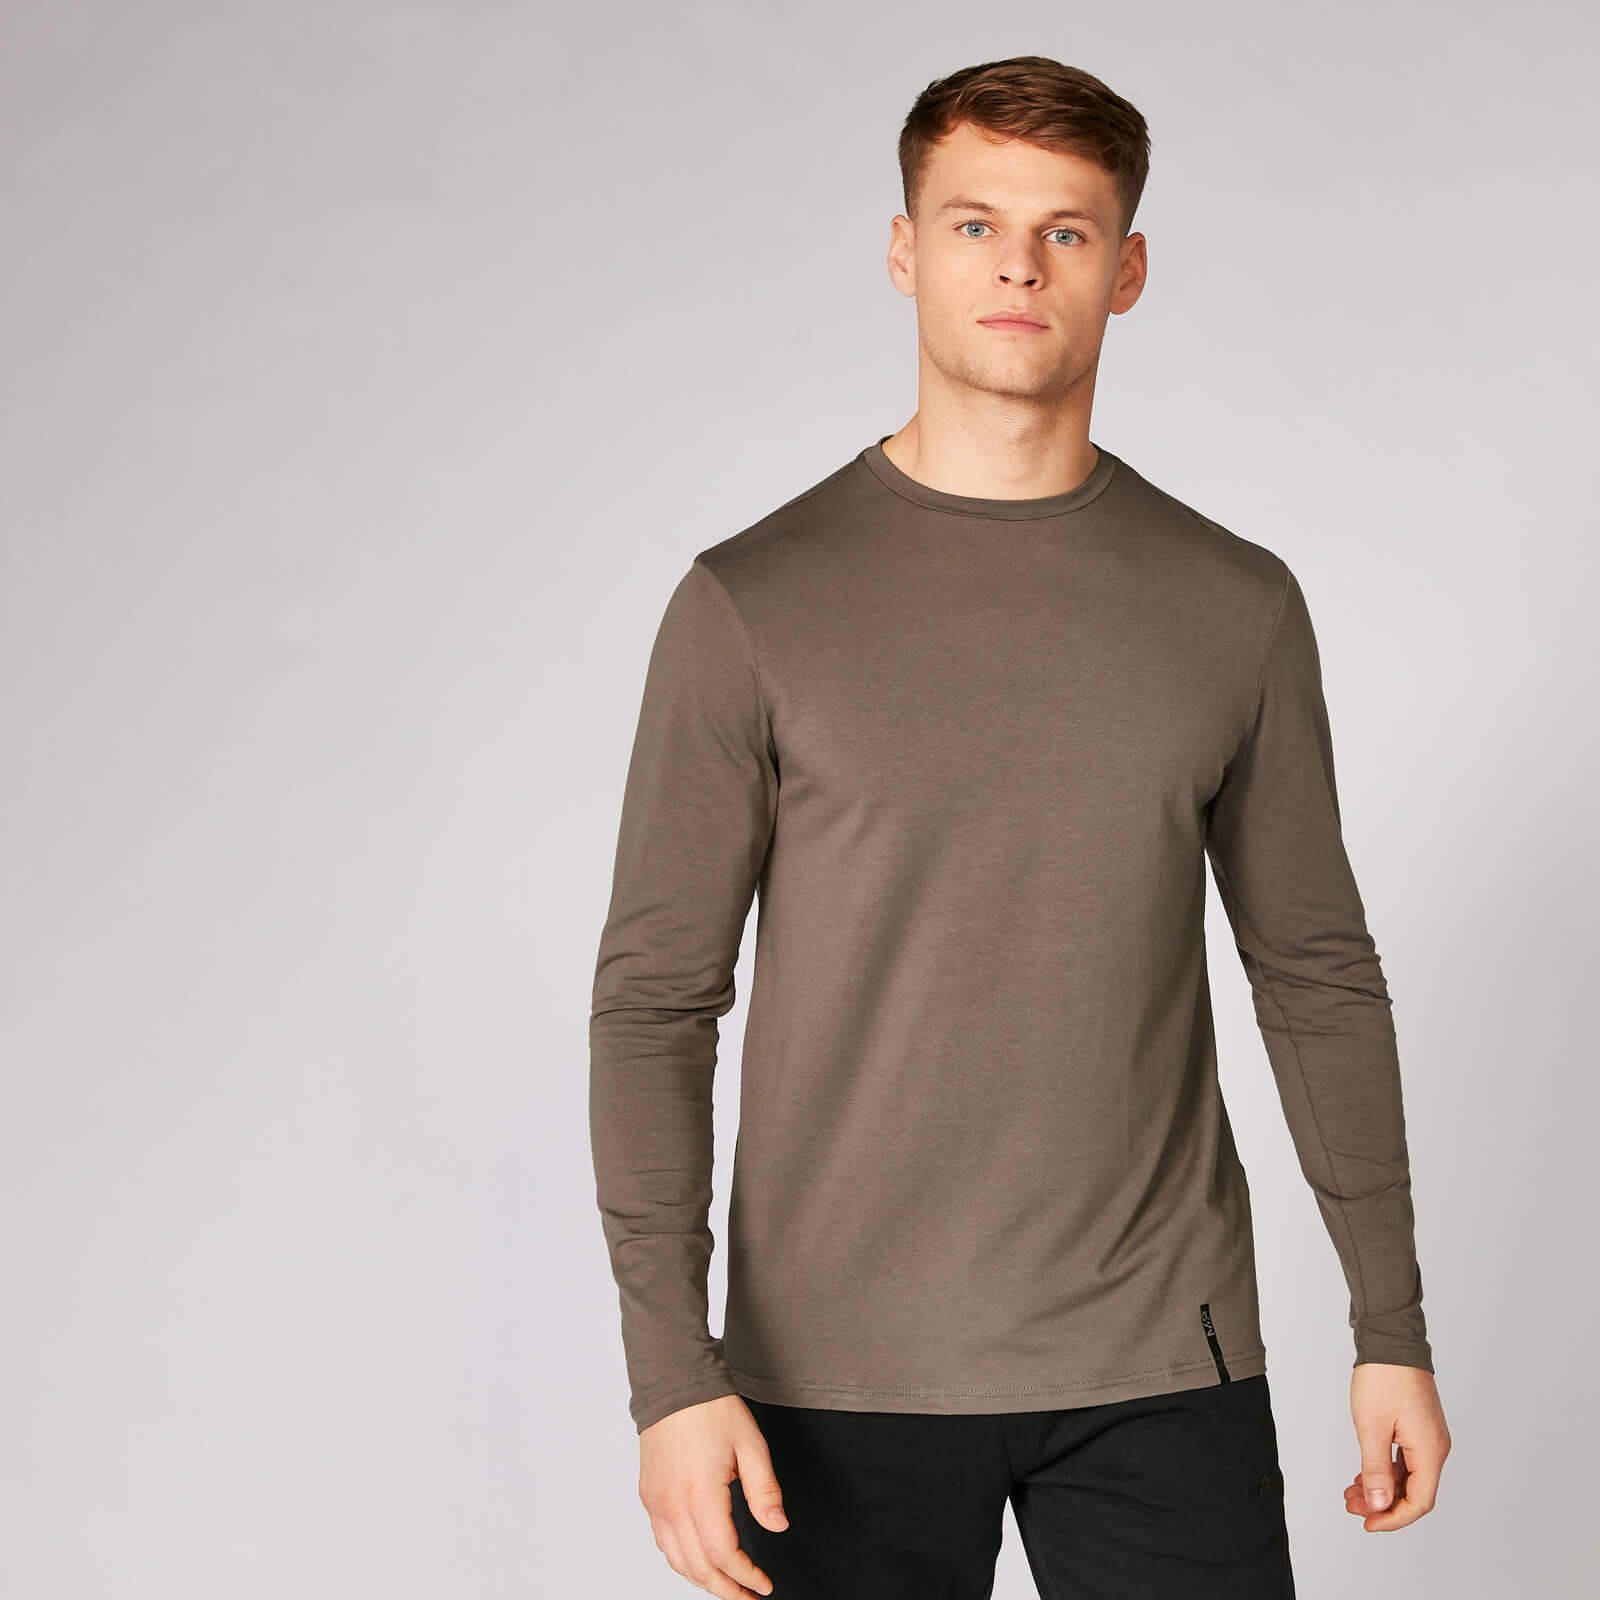 MP Men's Luxe Classic Long-Sleeve Crew - Driftwood - S